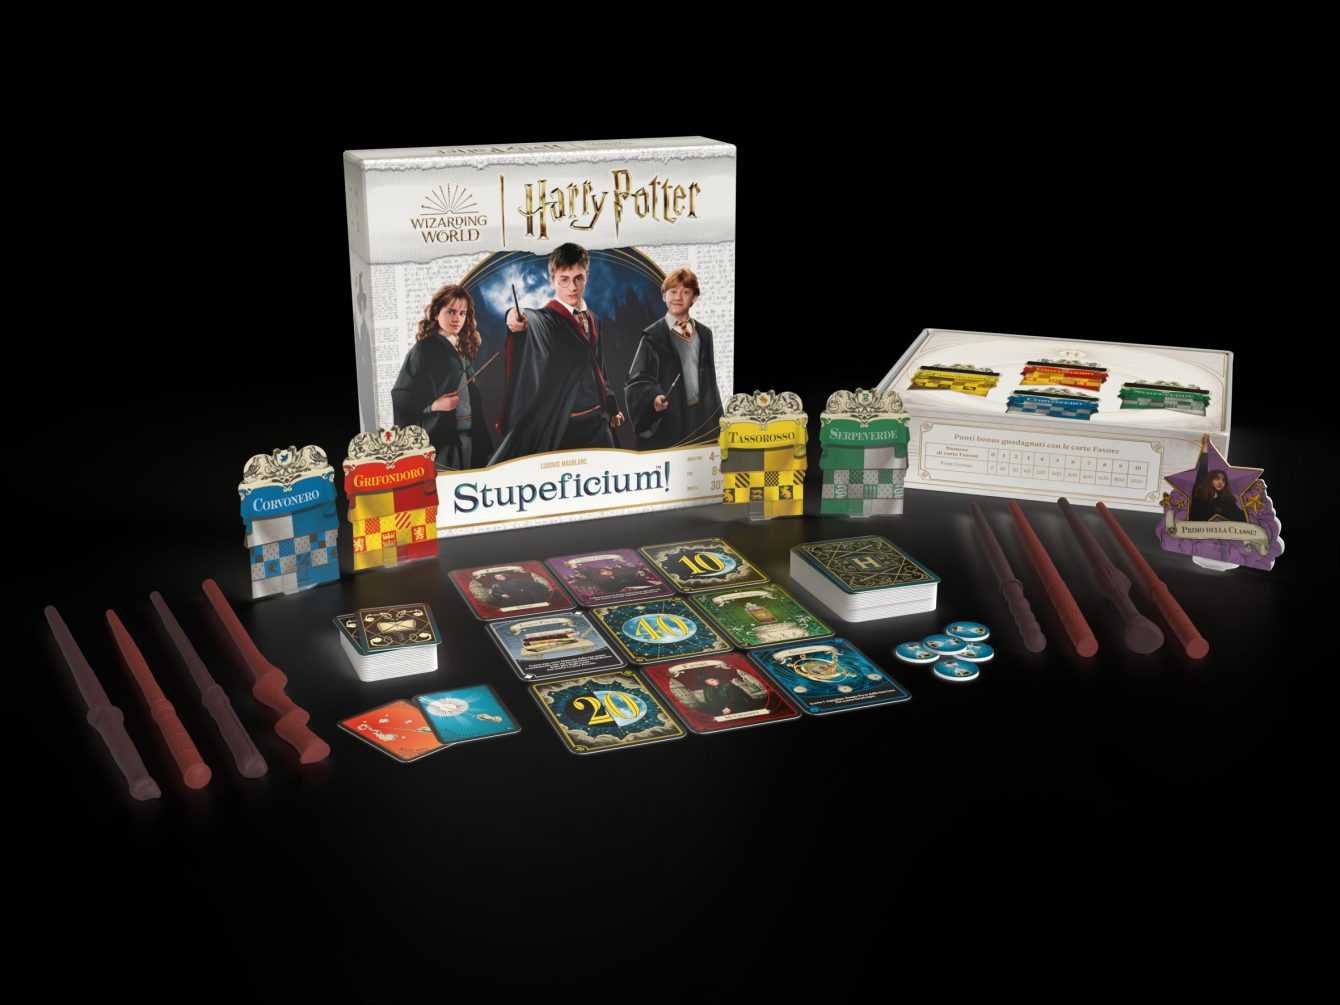 Harry Potter: here is the new board game Stupeficium